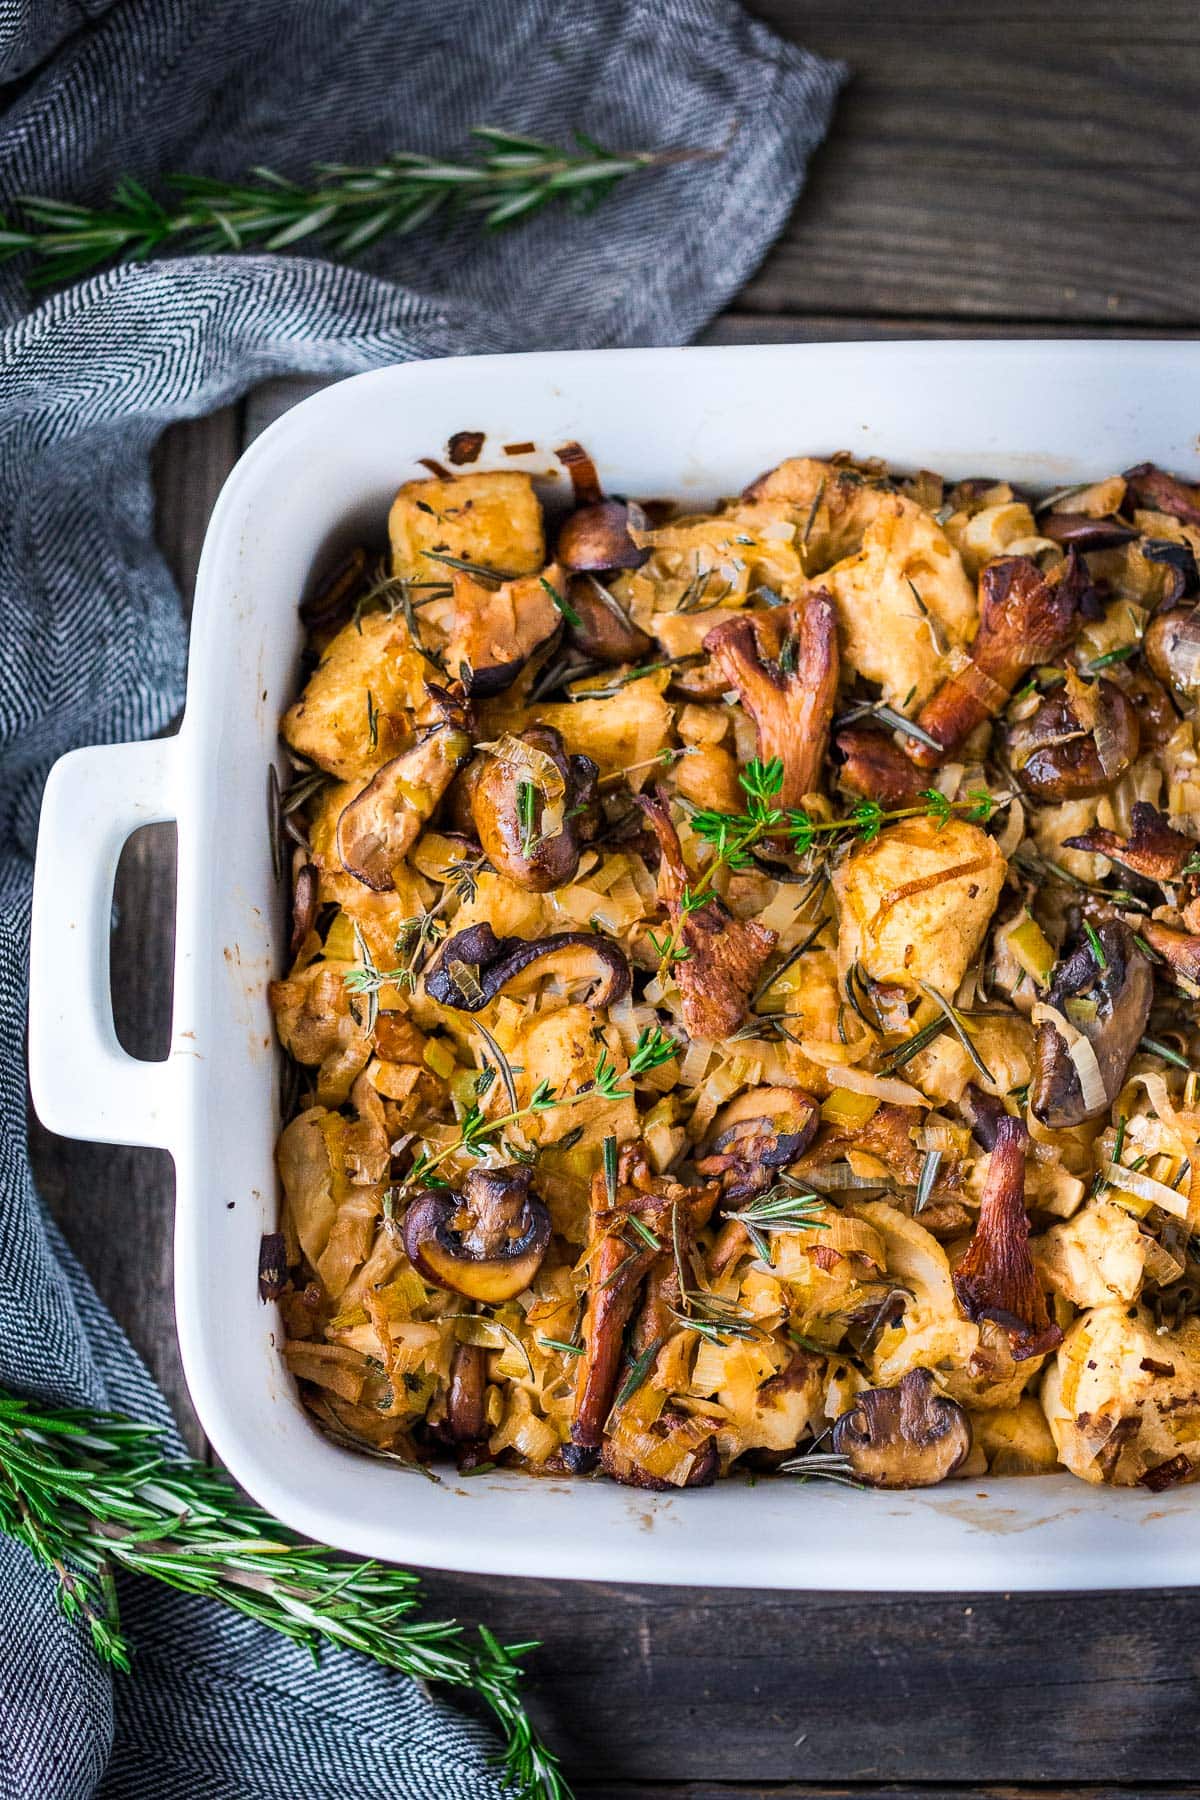 Packed full of mushrooms, leeks and thyme, this Mushroom Stuffing recipe is so savory and delicious! A tasty vegetarian side dish full of depth and umami flavor, perfect for the holiday table, or as a hearty vegetarian main. Vegan-adaptable!